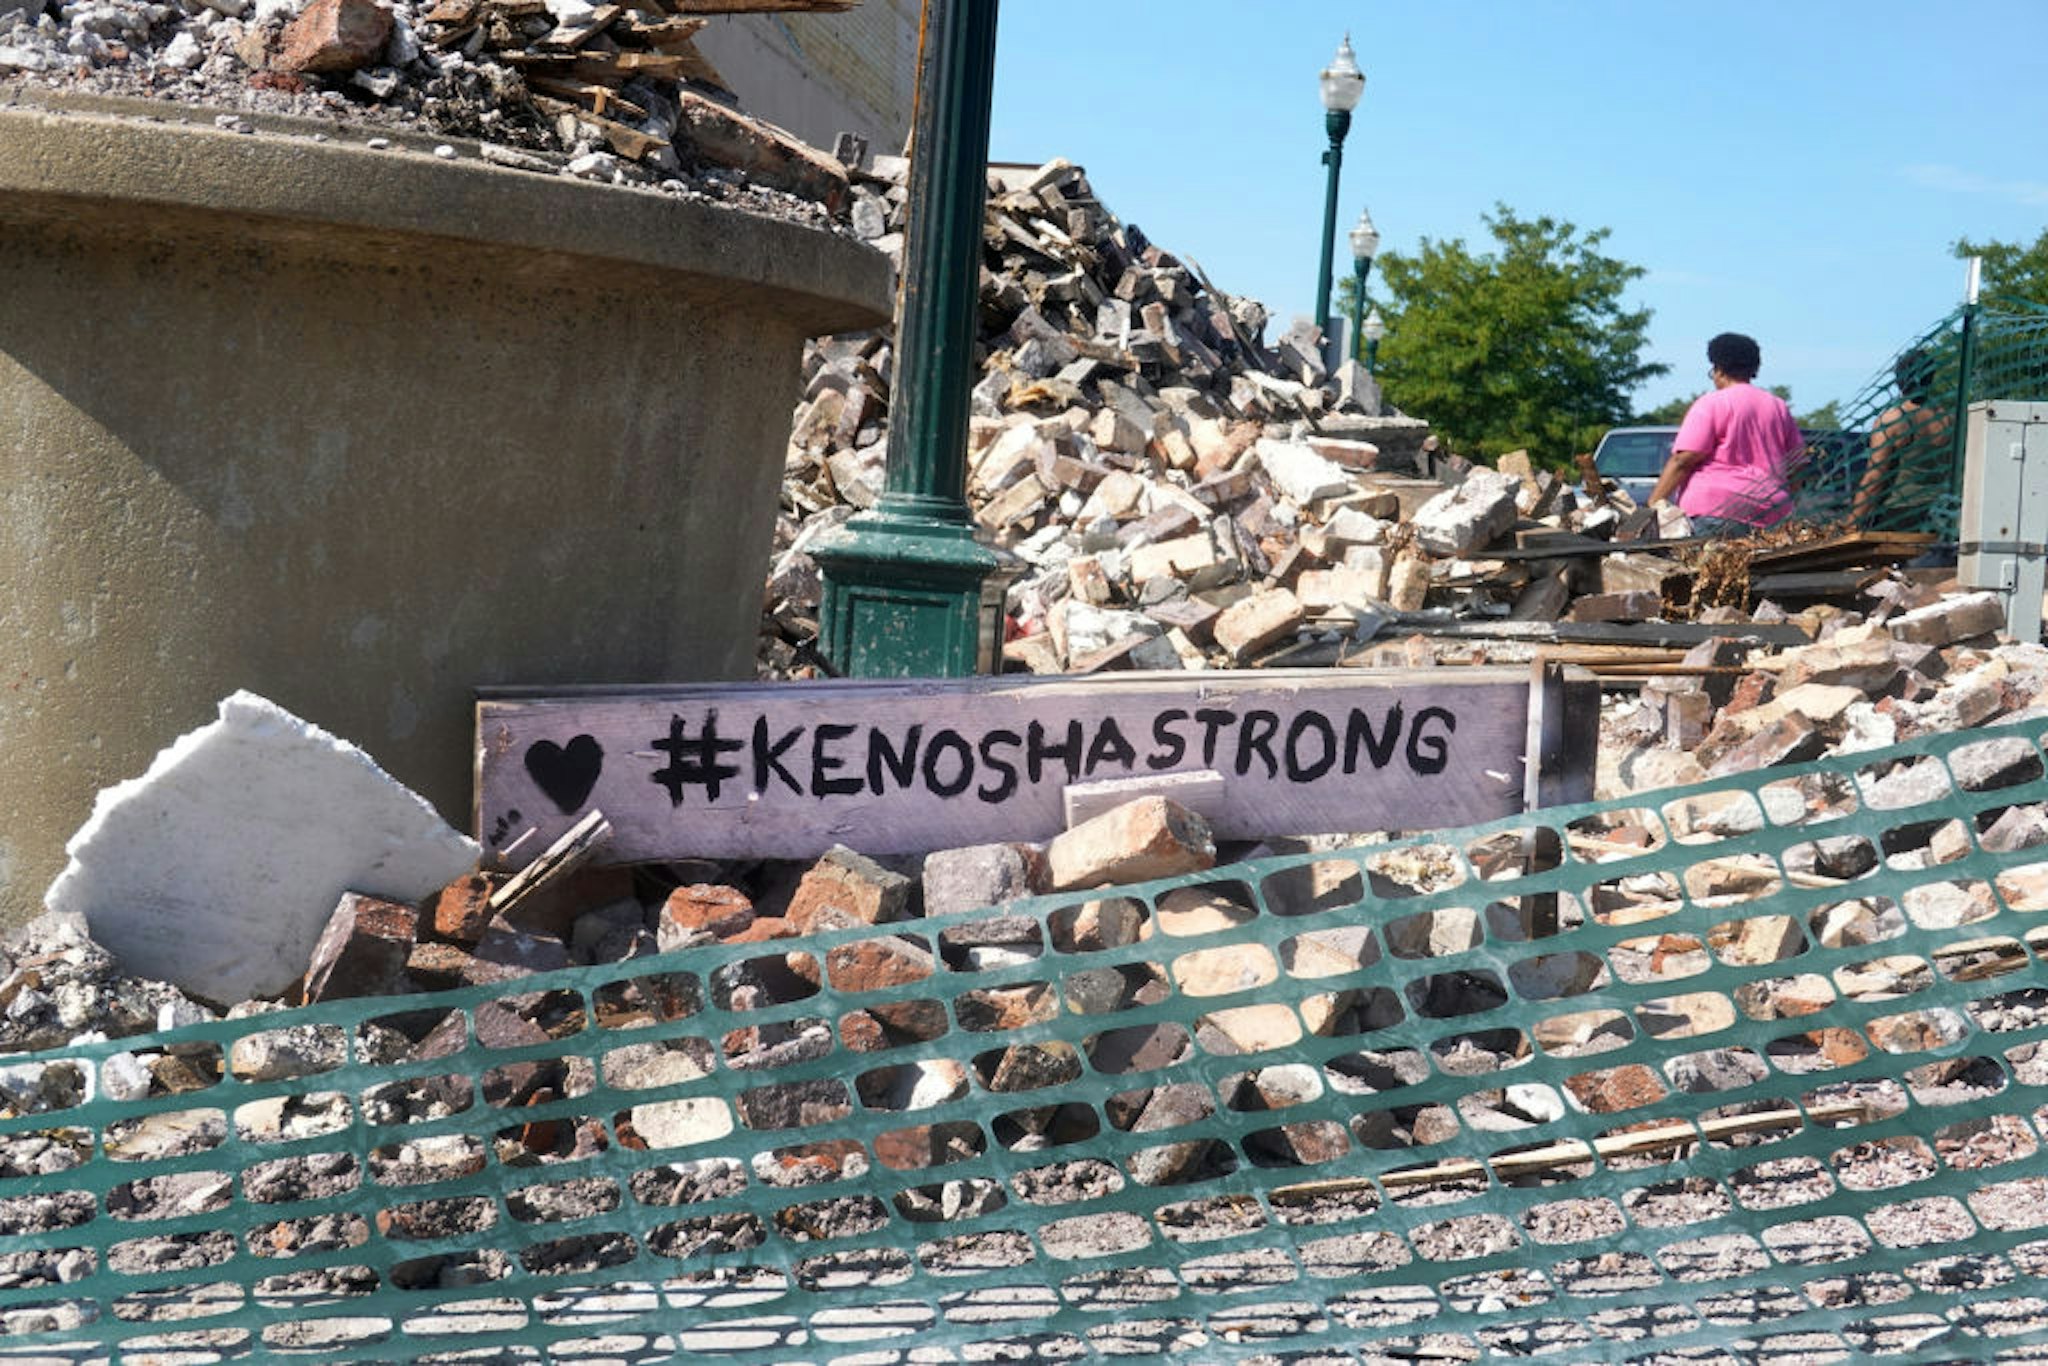 KENOSHA, WISCONSIN - AUGUST 28: People walk past a building that was reduced to rubble after being burned during recent rioting following the shooting of Jacob Blake on August 28, 2020 in Kenosha, Wisconsin. Blake remains in the hospital after being shot seven times in the back in front of his three children by a police officer.